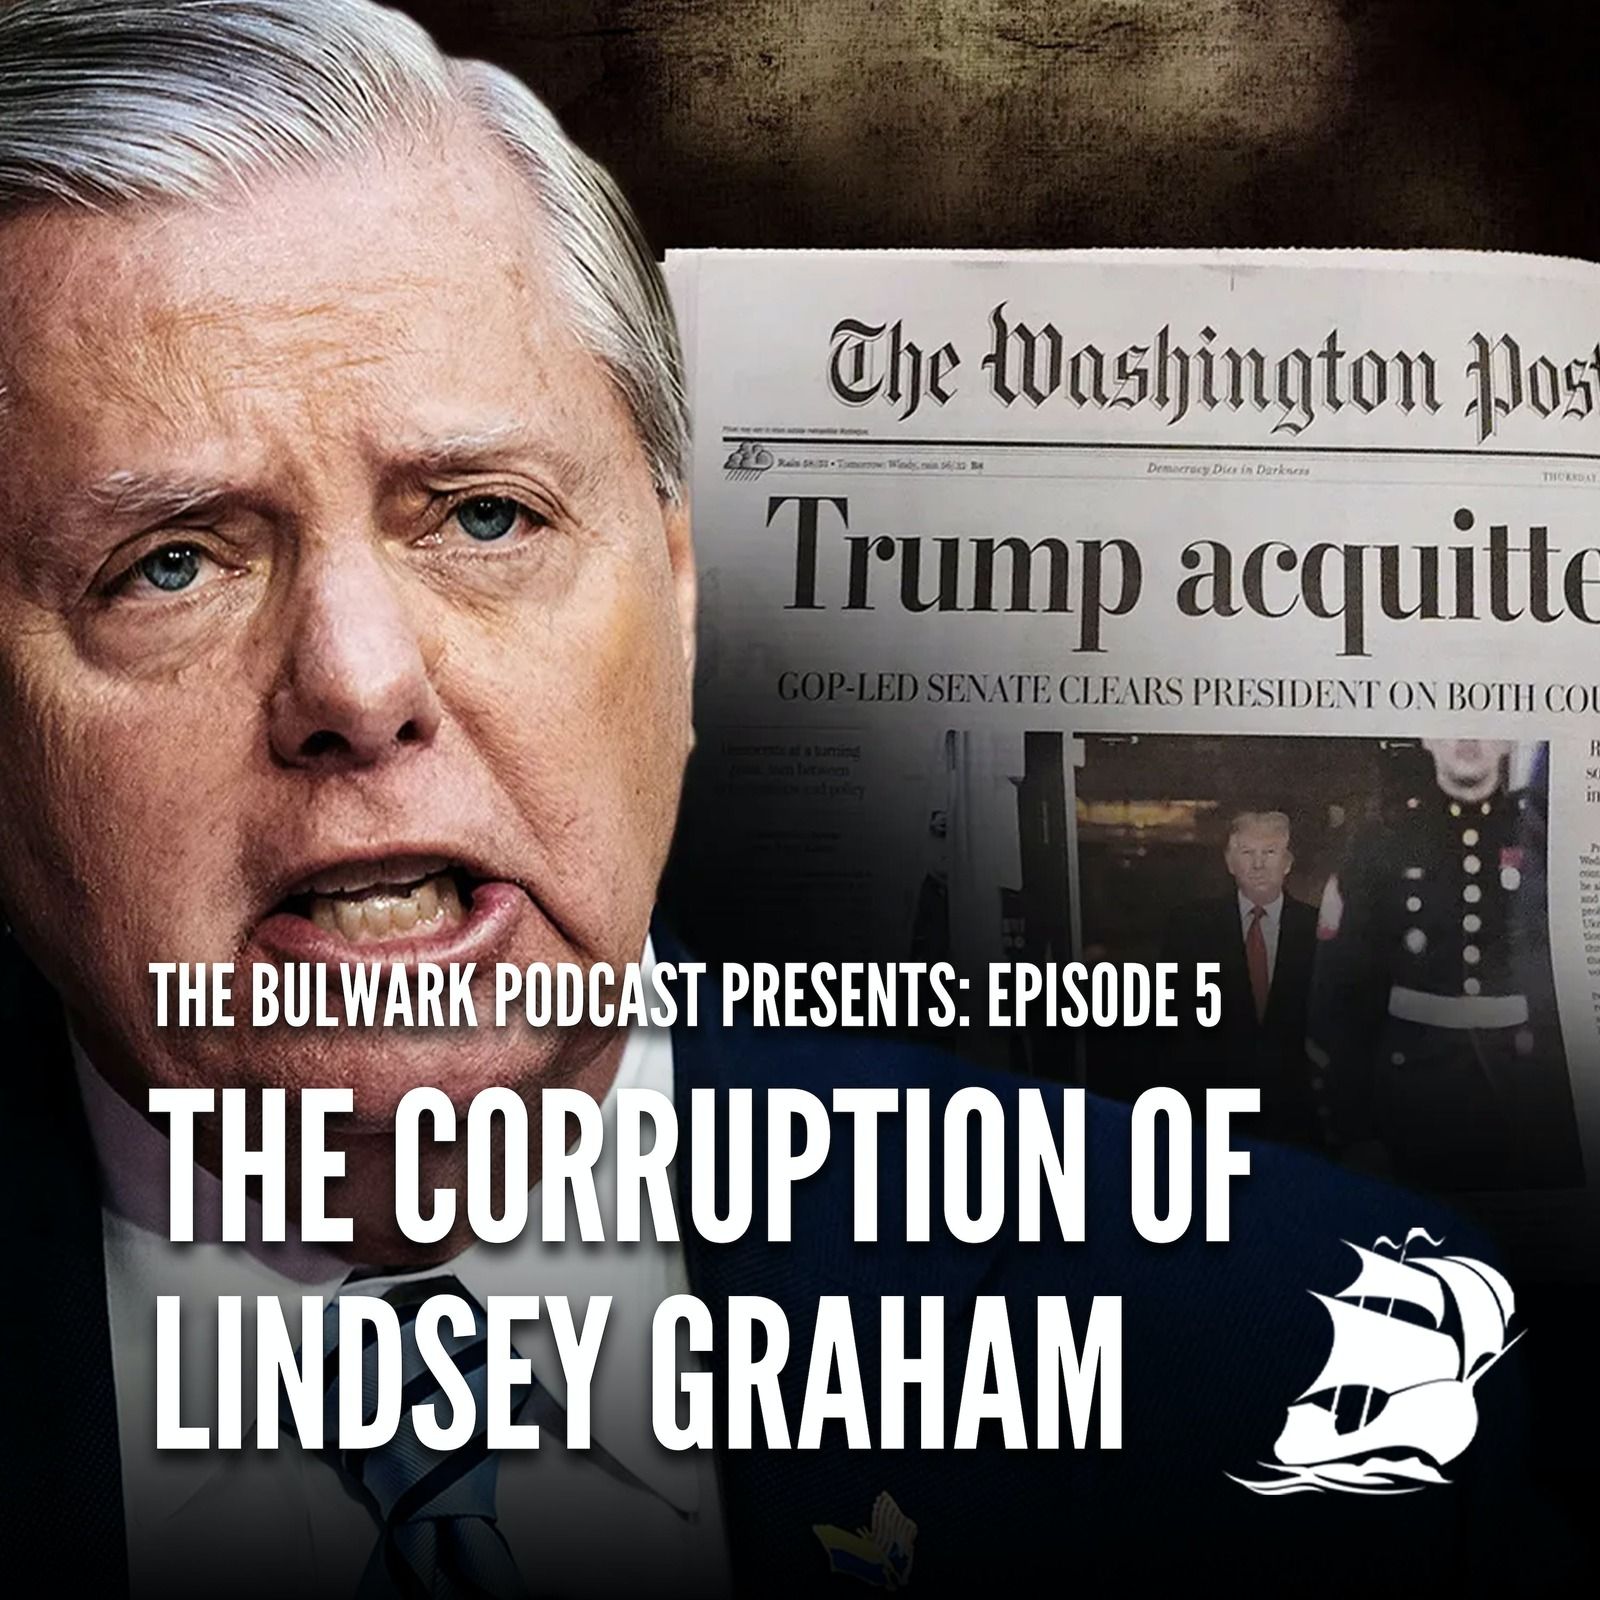 Ep. 5: The Corruption of Lindsey Graham by The Bulwark Podcast